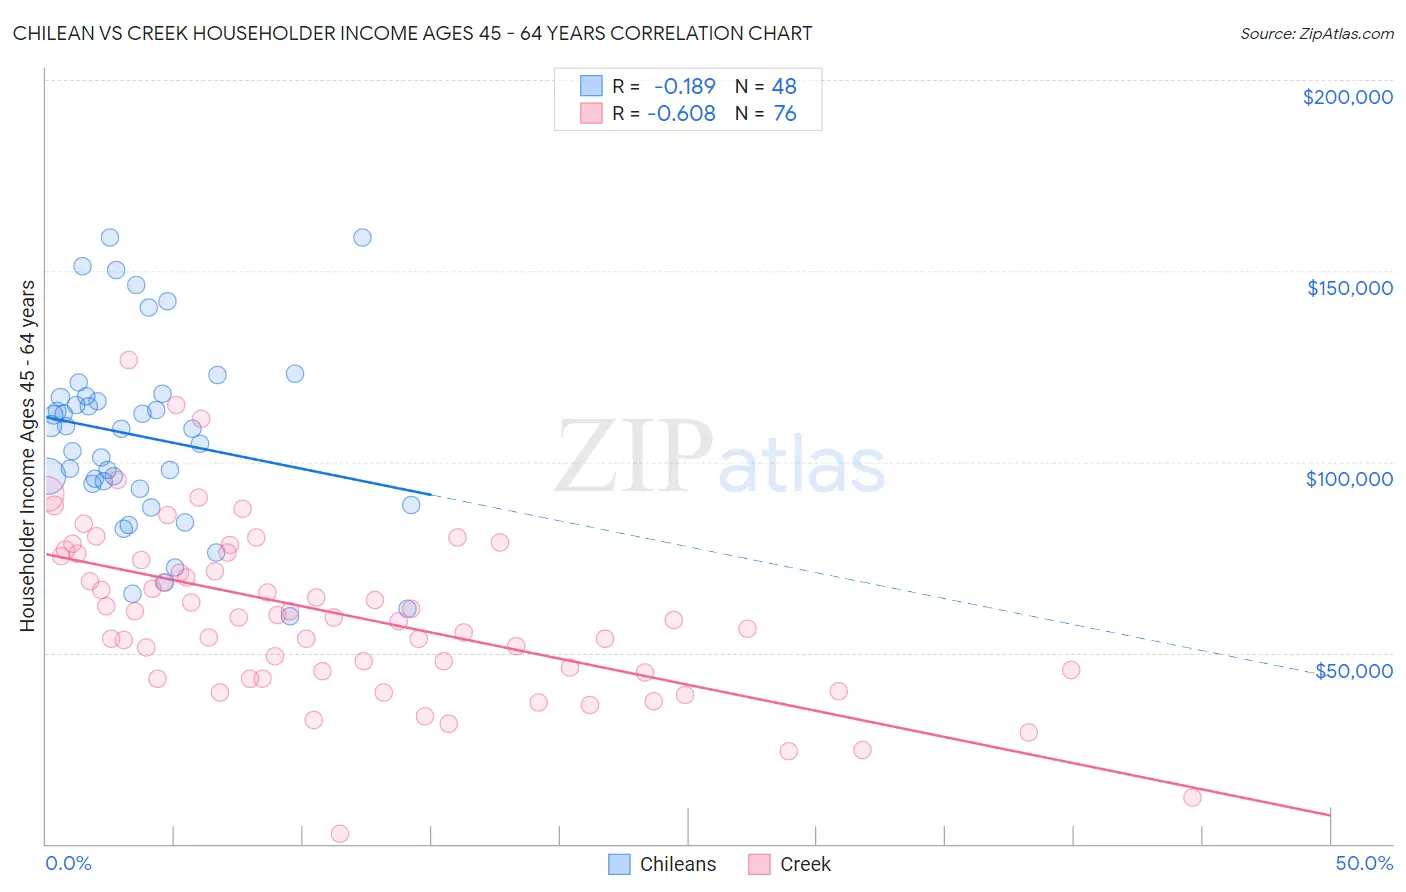 Chilean vs Creek Householder Income Ages 45 - 64 years